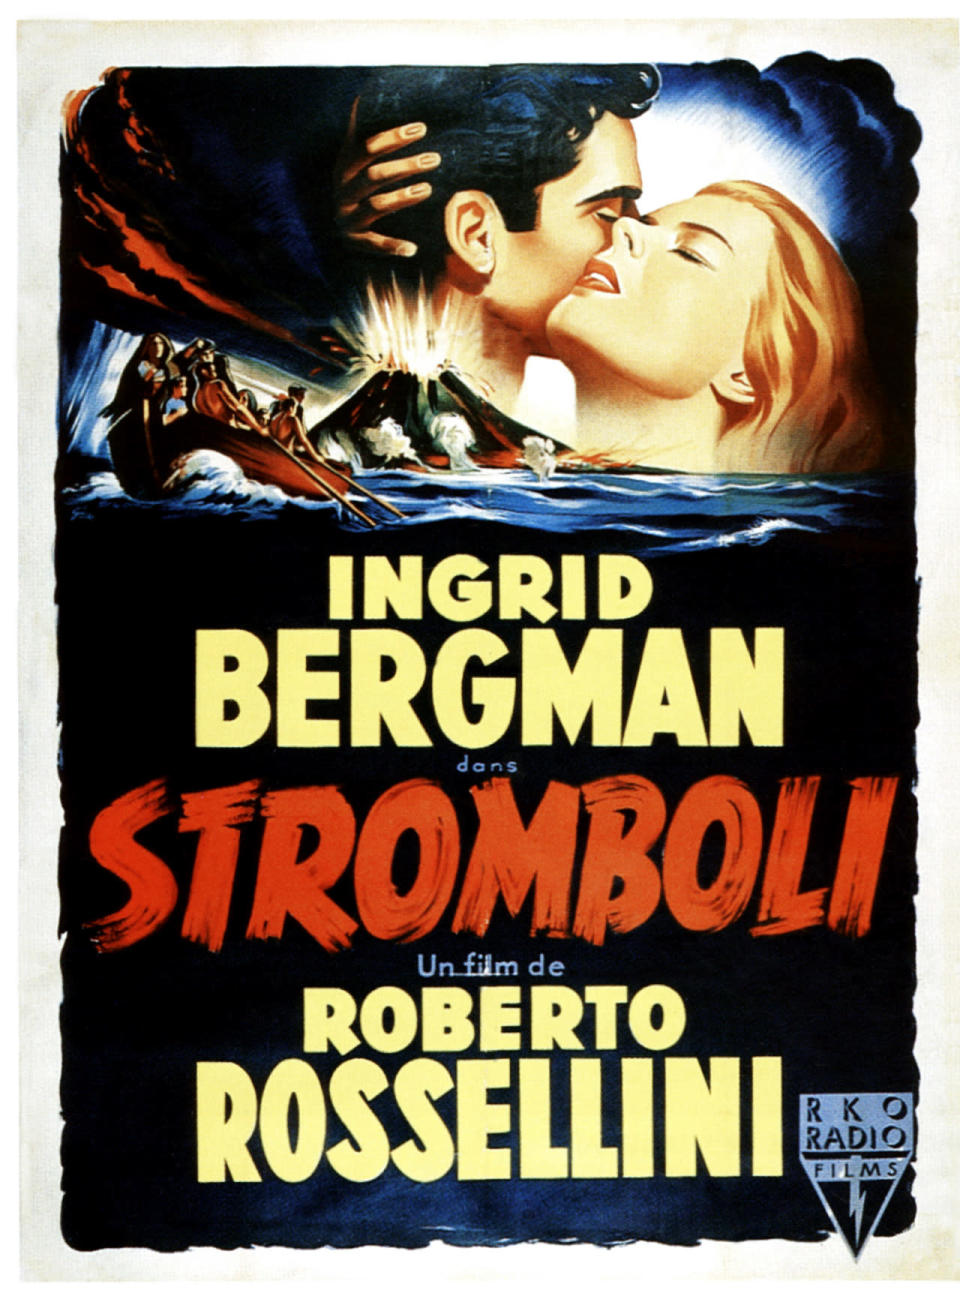 'Stromboli’ (1950) – Ingrid Bergman & Roberto Rossellini Here’s some extra-marital business that ended in real trouble…When Swedish actress Ingrid Bergman wrote to the Italian auteur Roberto Rossellini to tell him how much she admired his work, he immediately invited her to collaborate with him. This partnership turned physical and she left her dentist husband Petter Lindström for the director. Bergman was vilified in the US for her affair and was even denounced on the floor of the US Senate by senator Edwin Johnson for her 'indecent behaviour’. Which seems a bit harsh…